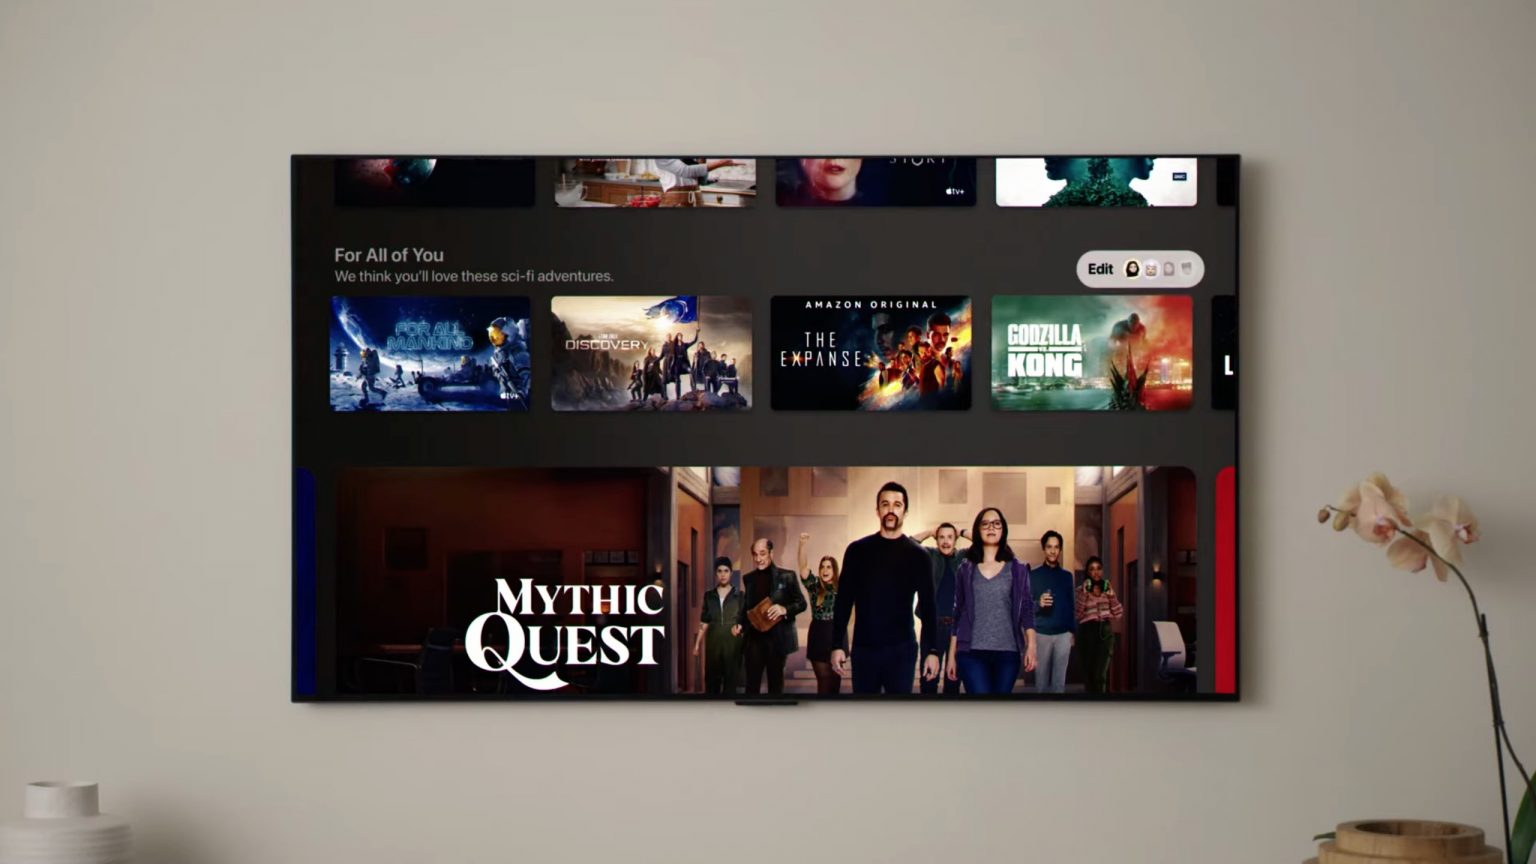 tvOS-15-Apple-TV-app-For-all-of-You-section-Edit-001-1536×864